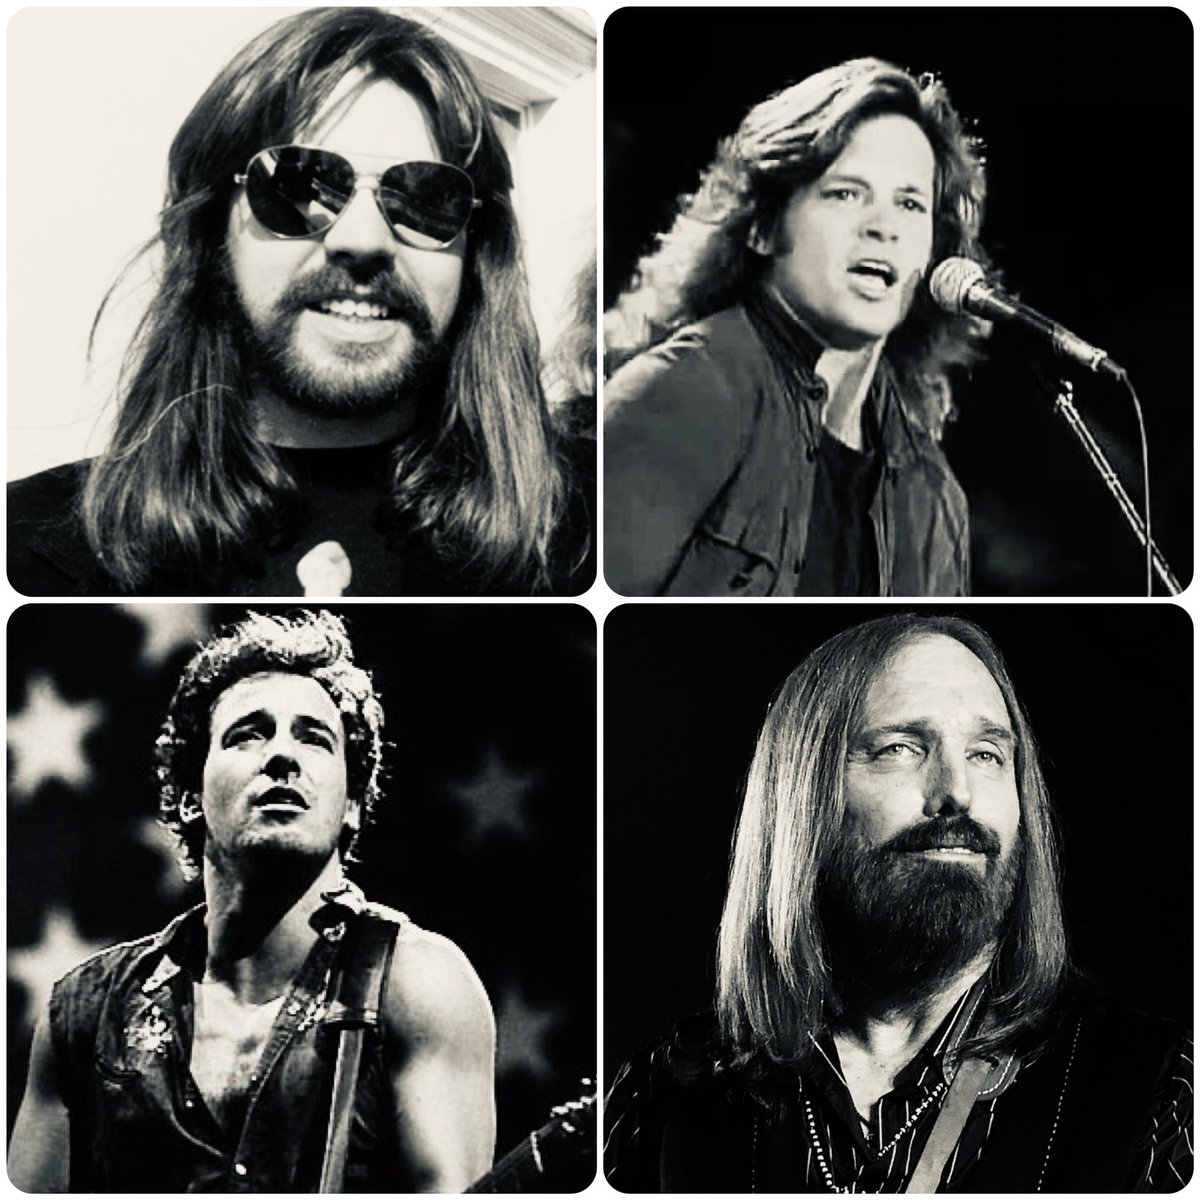 Who's your pick here?
#BobSeger
#JohnMellencamp
#BruceSpringsteen
#TomPetty